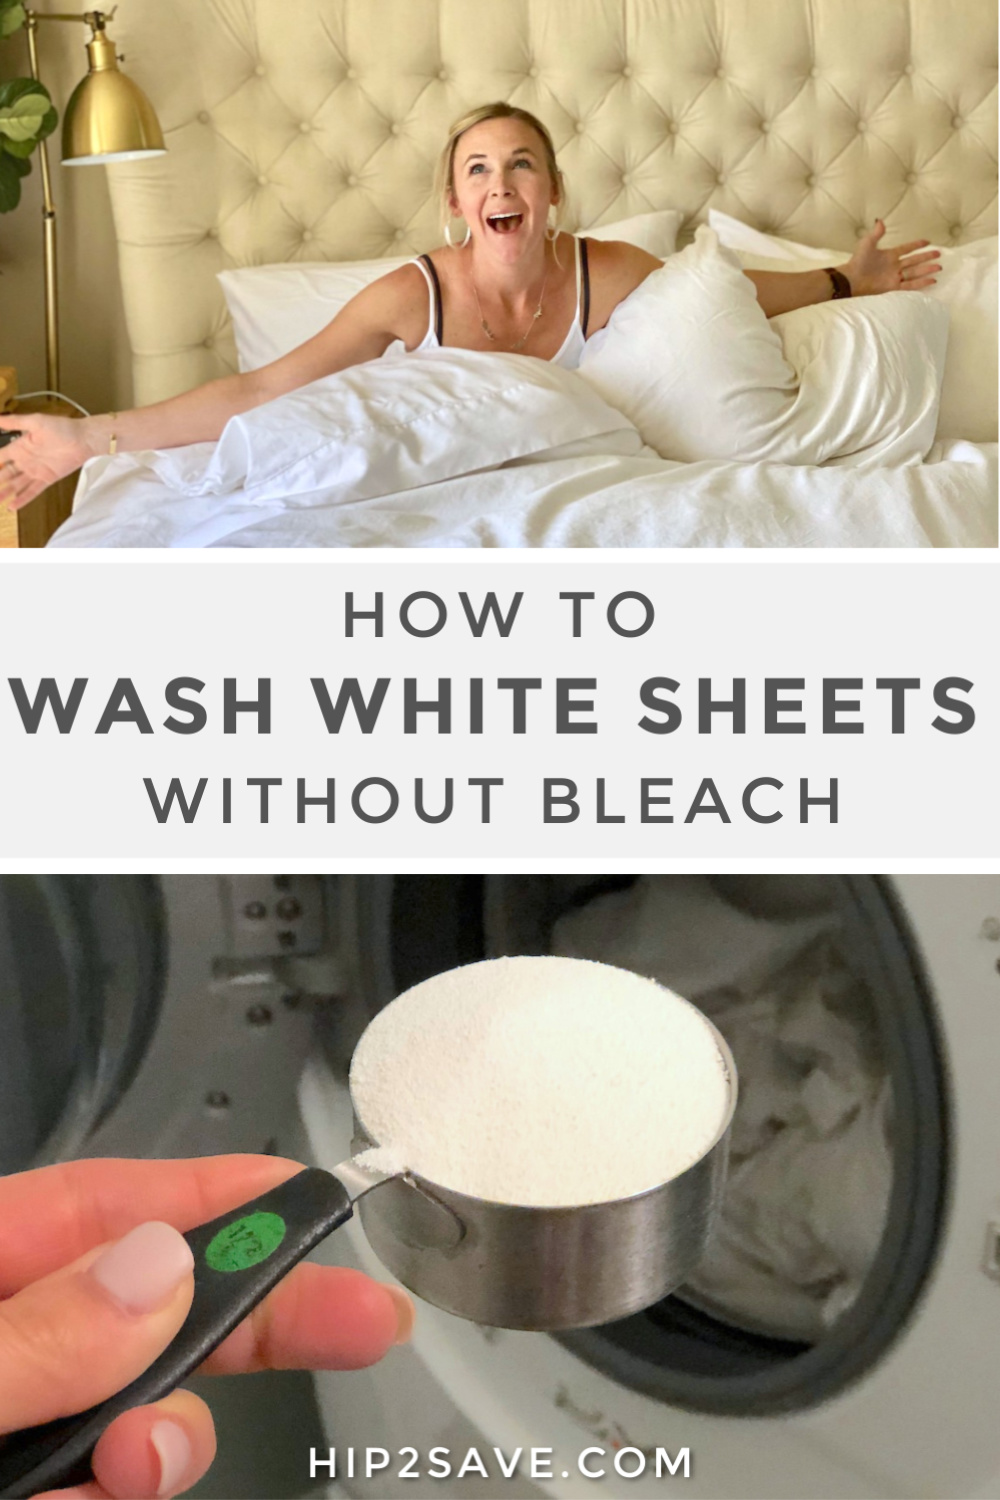 https://hip2save.com/wp-content/uploads/2019/03/wash-white-sheets-without-bleach-pinterest.jpg?fit=1000%2C1500&strip=all